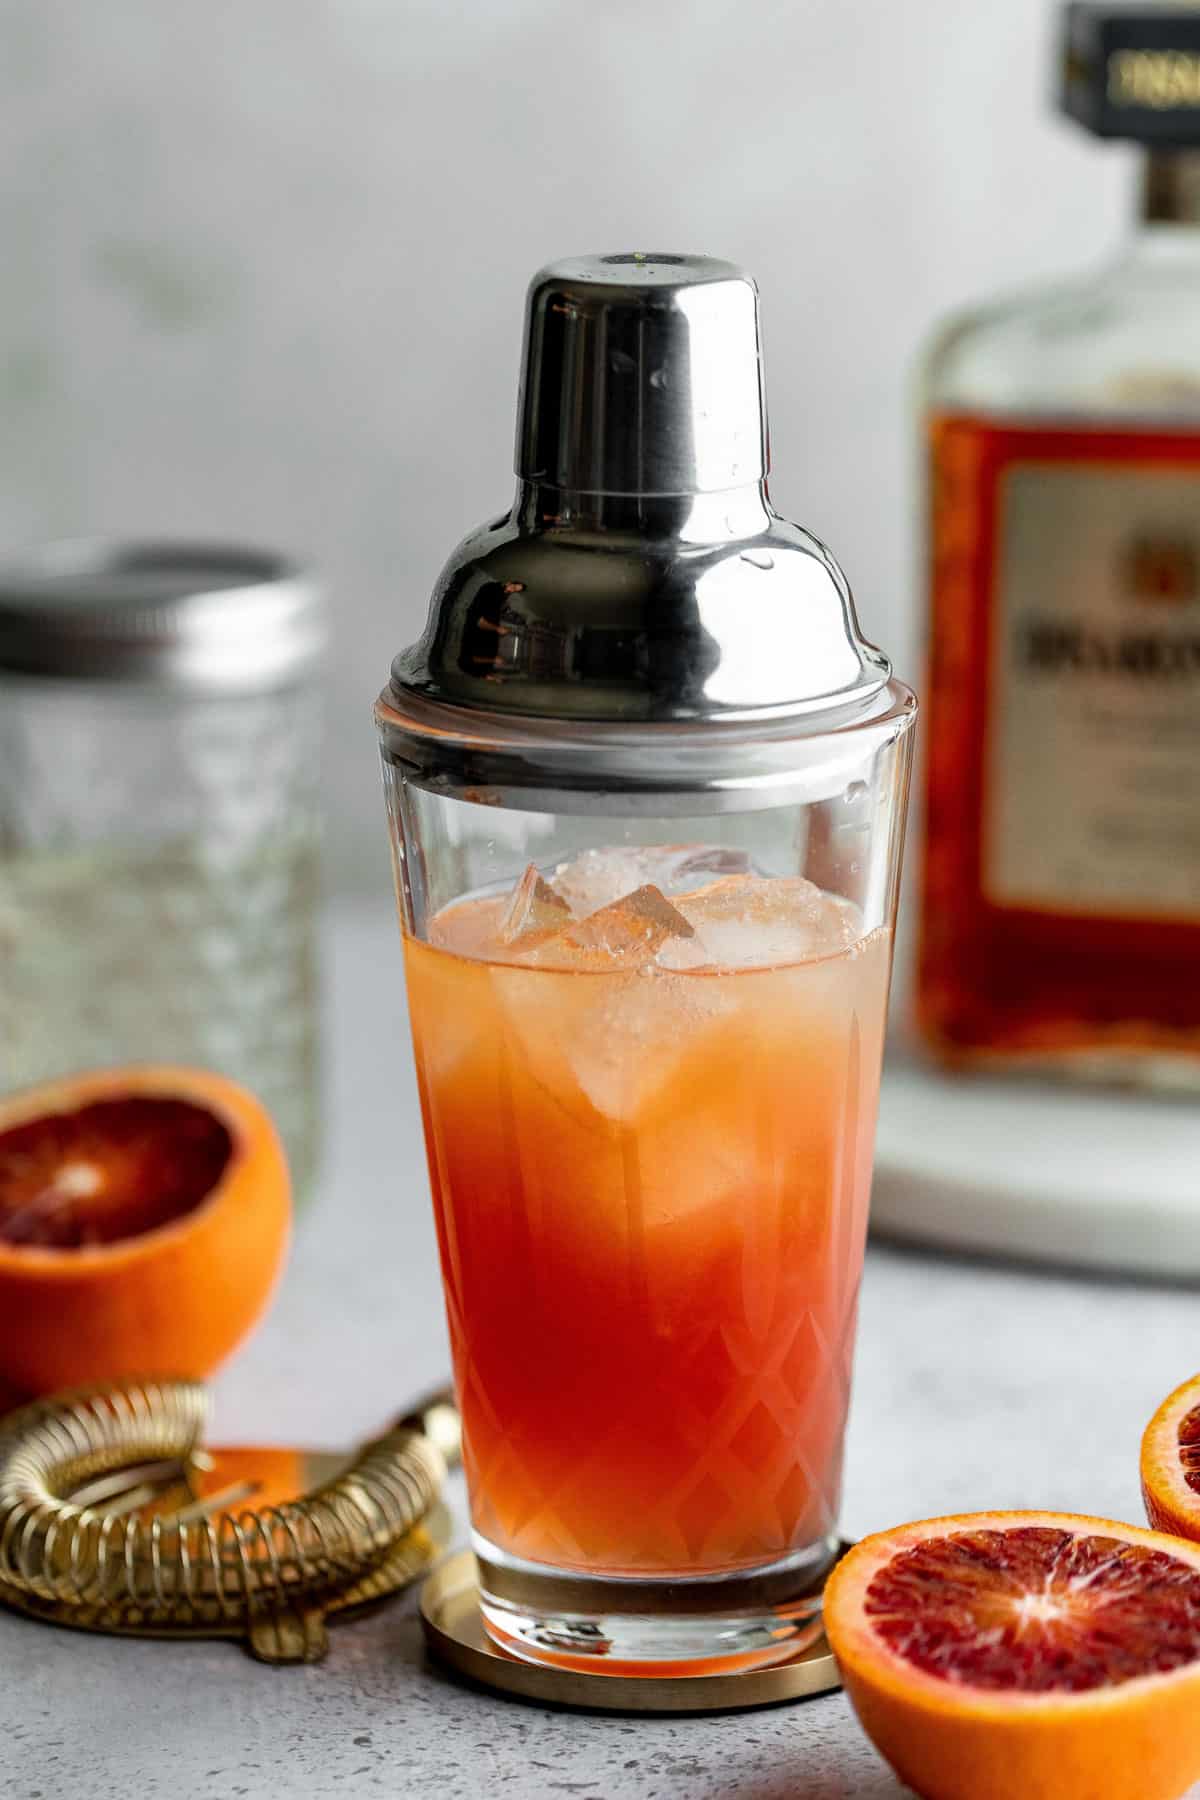 Blood orange amaretto sour in a cocktail shaker with bottles and blood oranges.